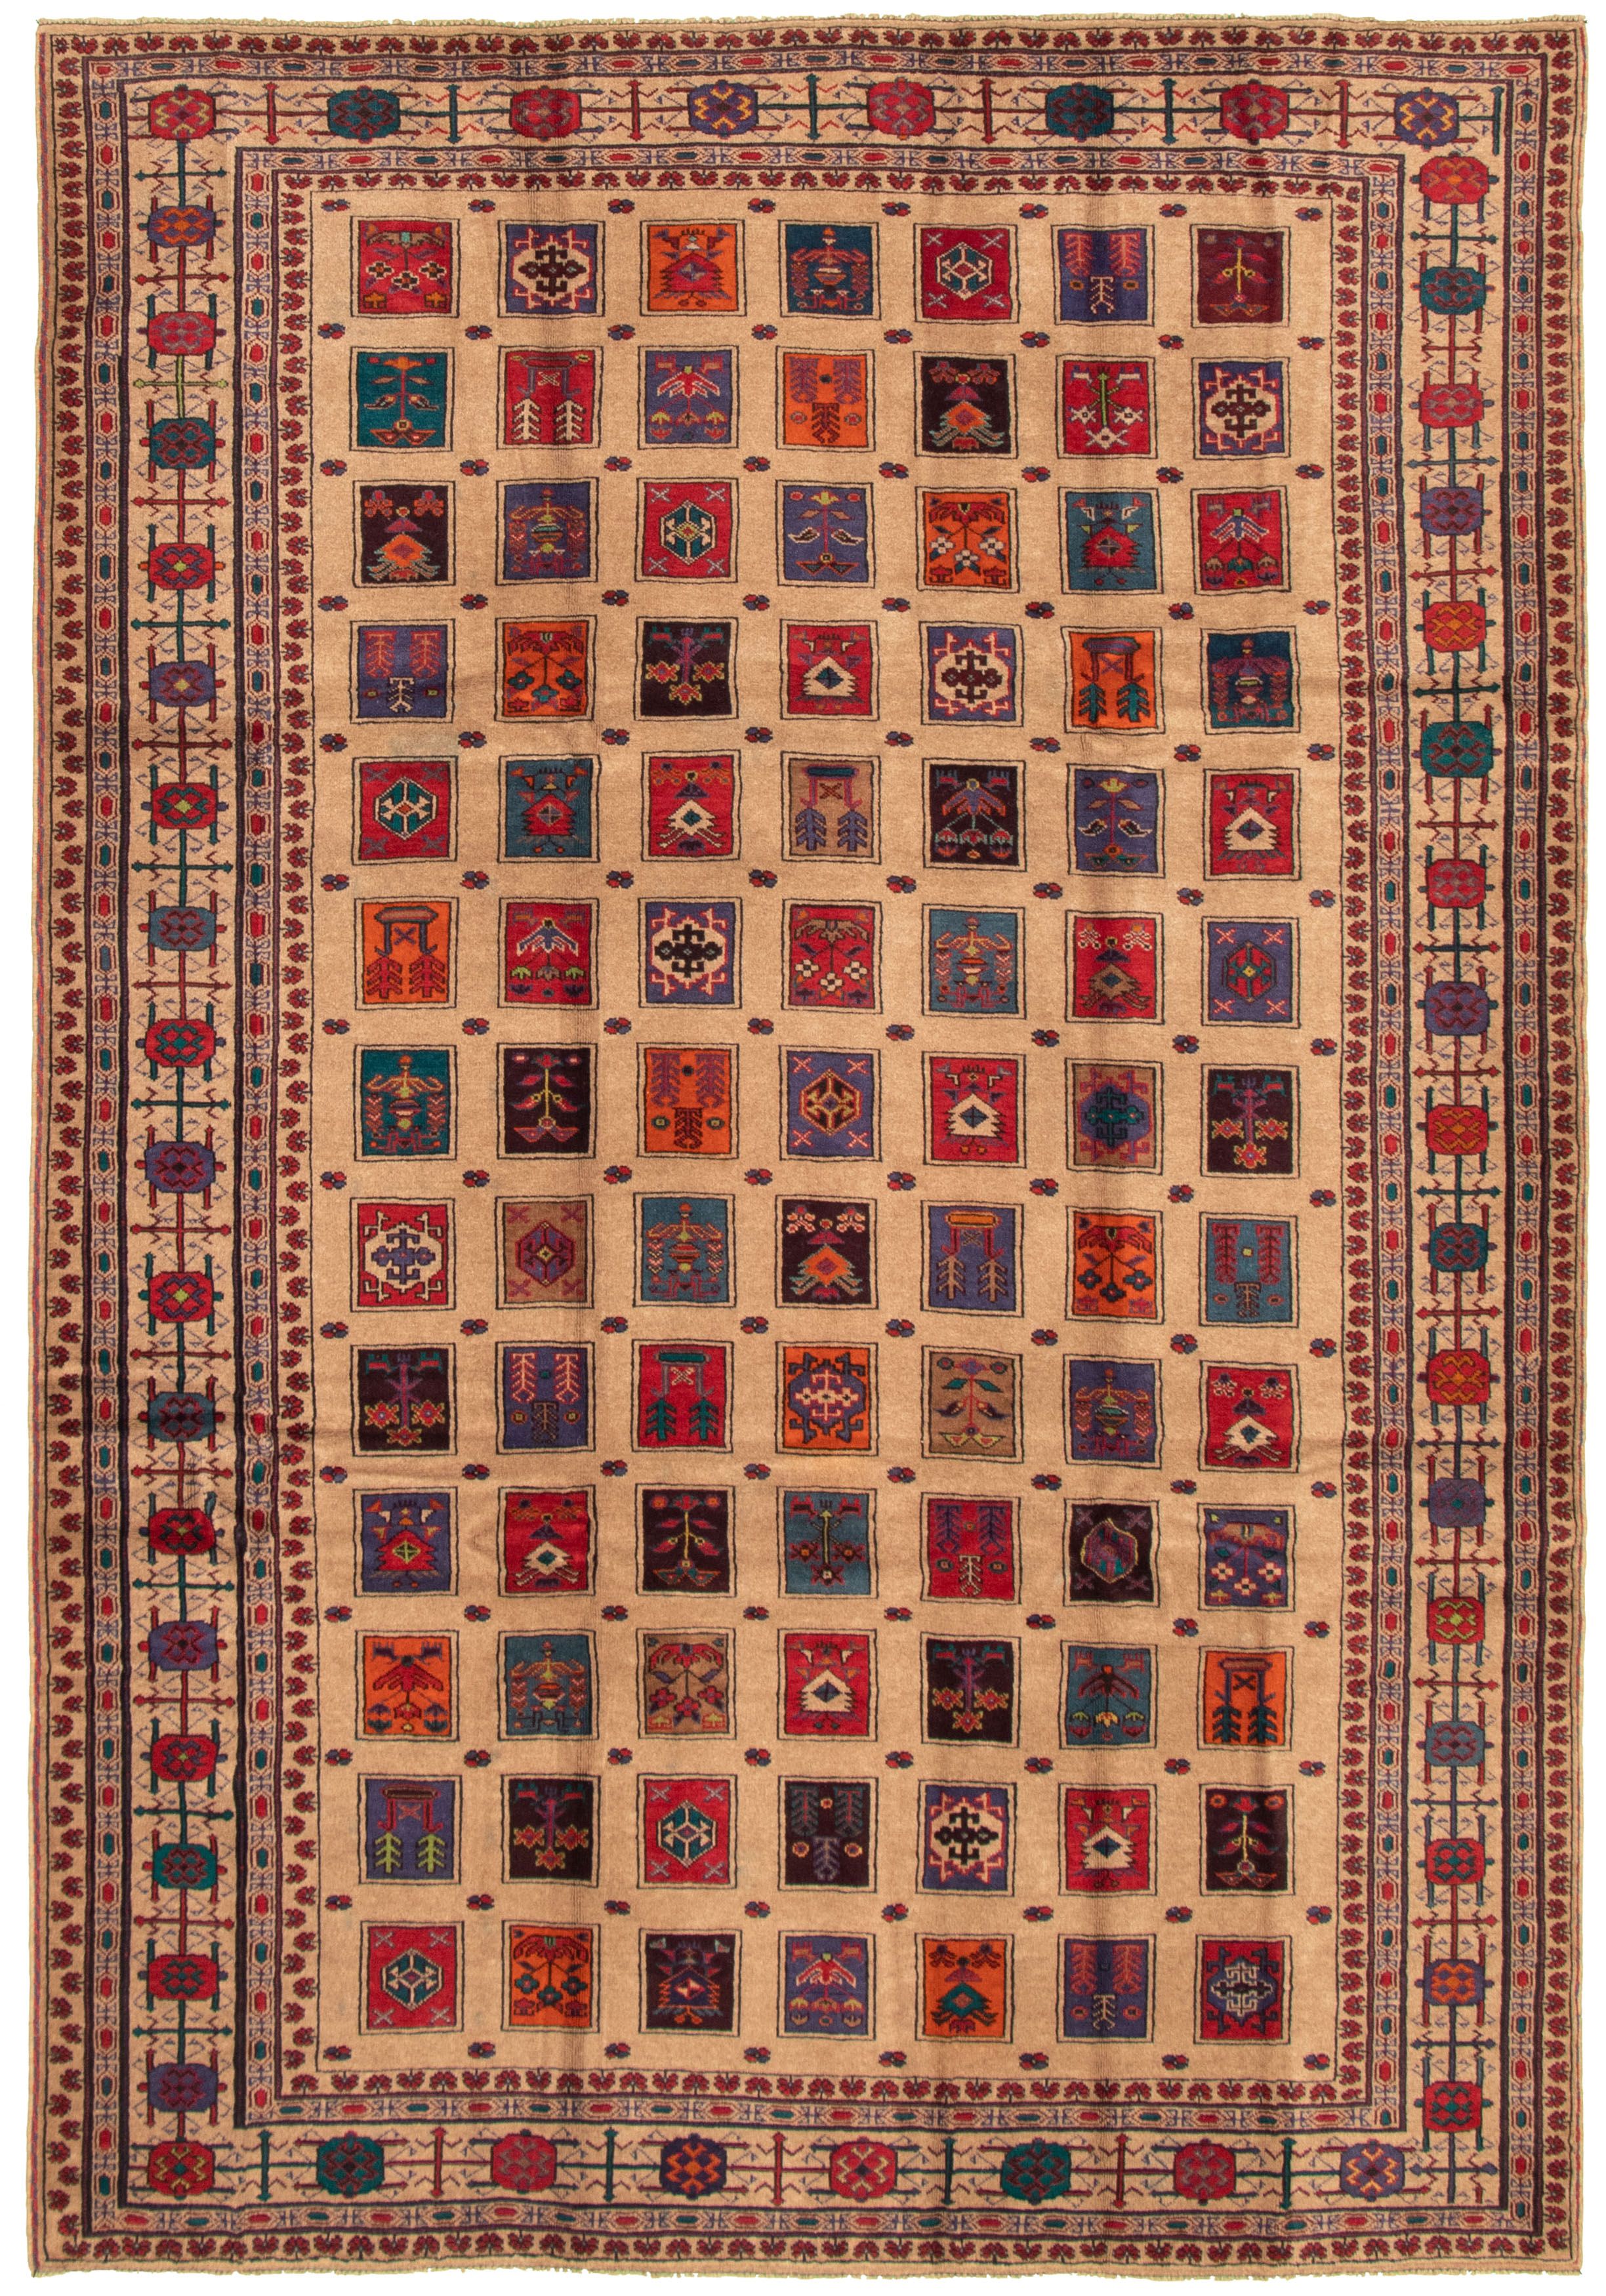 Bedroom 355607 eCarpet Gallery Large Area Rug for Living Room Finest Khal Mohammadi Bordered Red Rug 6'7 x 9'8 Hand-Knotted Wool Rug 